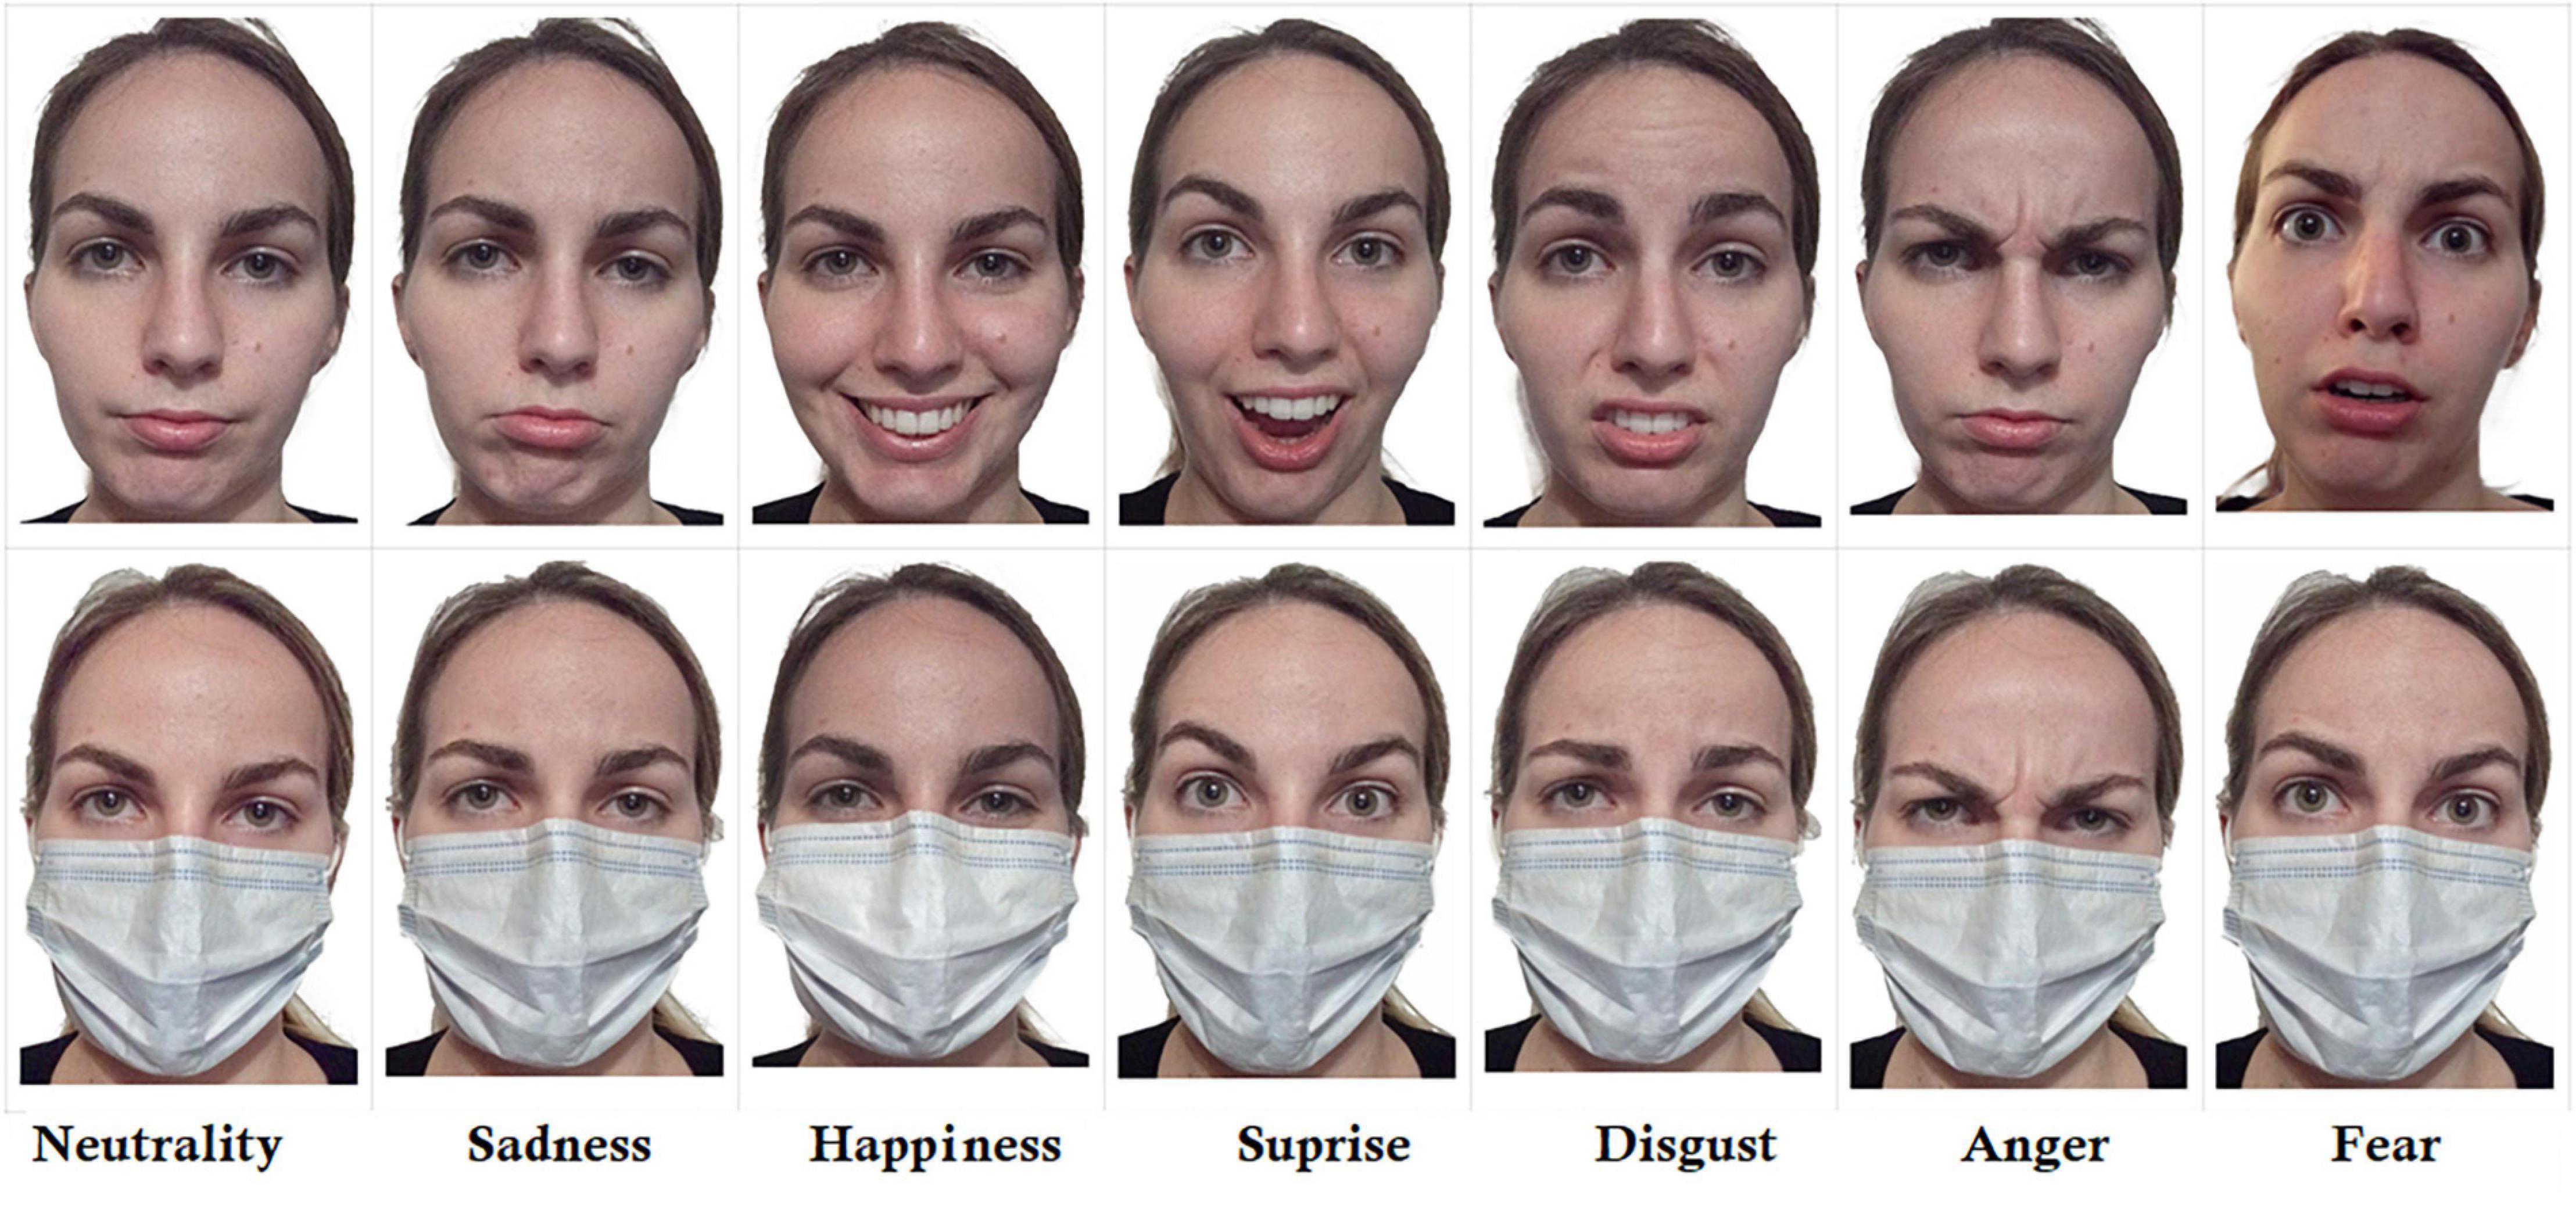 PDF) Teaching Using a Face Protection Mask: How Students of 6-15 Years Old  Perceive Their Teachers' Expressing Emotions during the Teaching Procedure